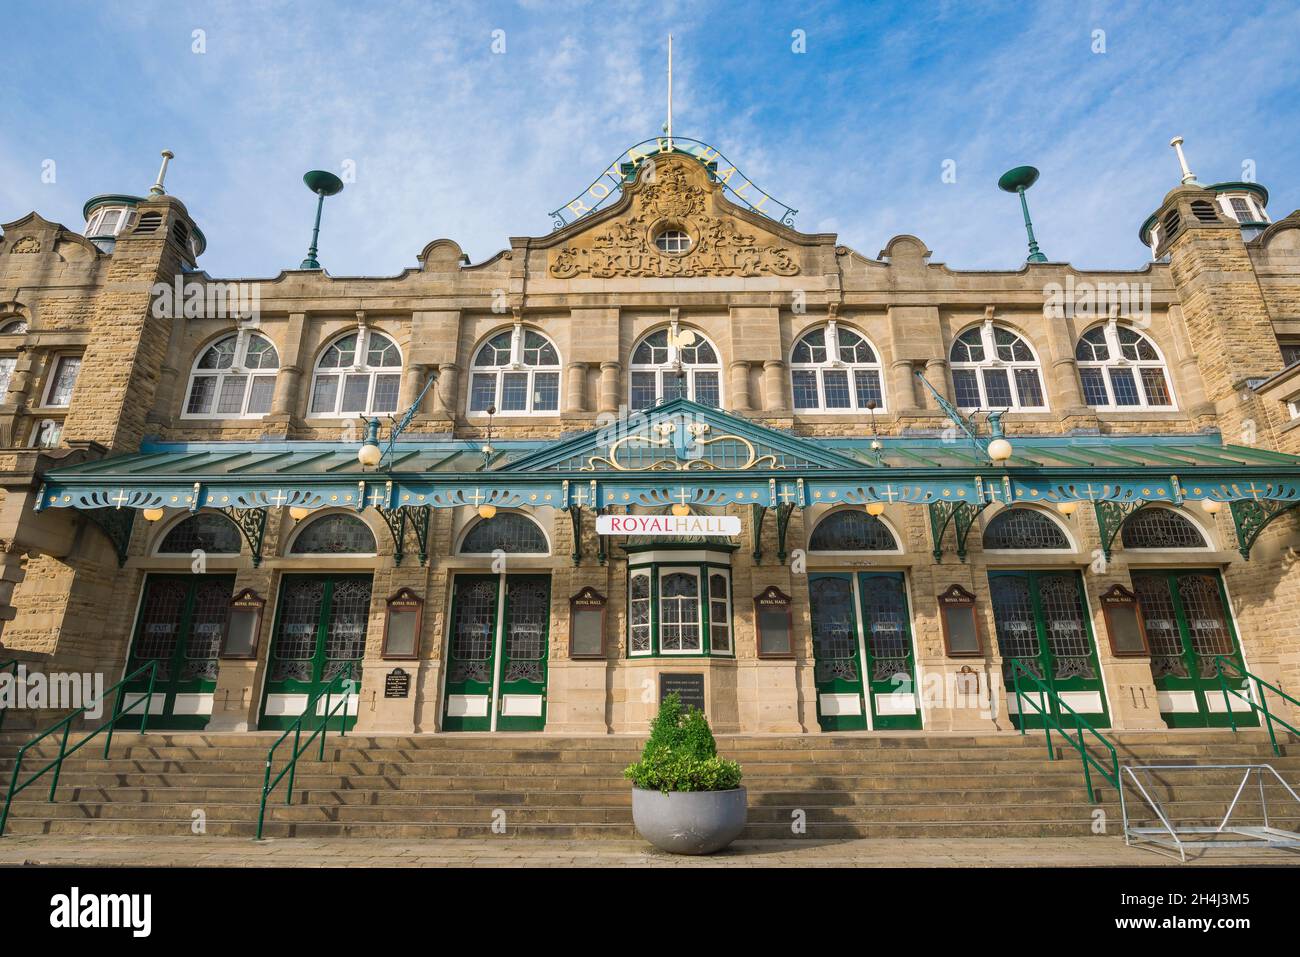 Harrogate Royal Hall, view of the Edwardian era Royal Hall (1903) - a carefully restored popular theatre and entertainment venue in Harrogate, UK Stock Photo